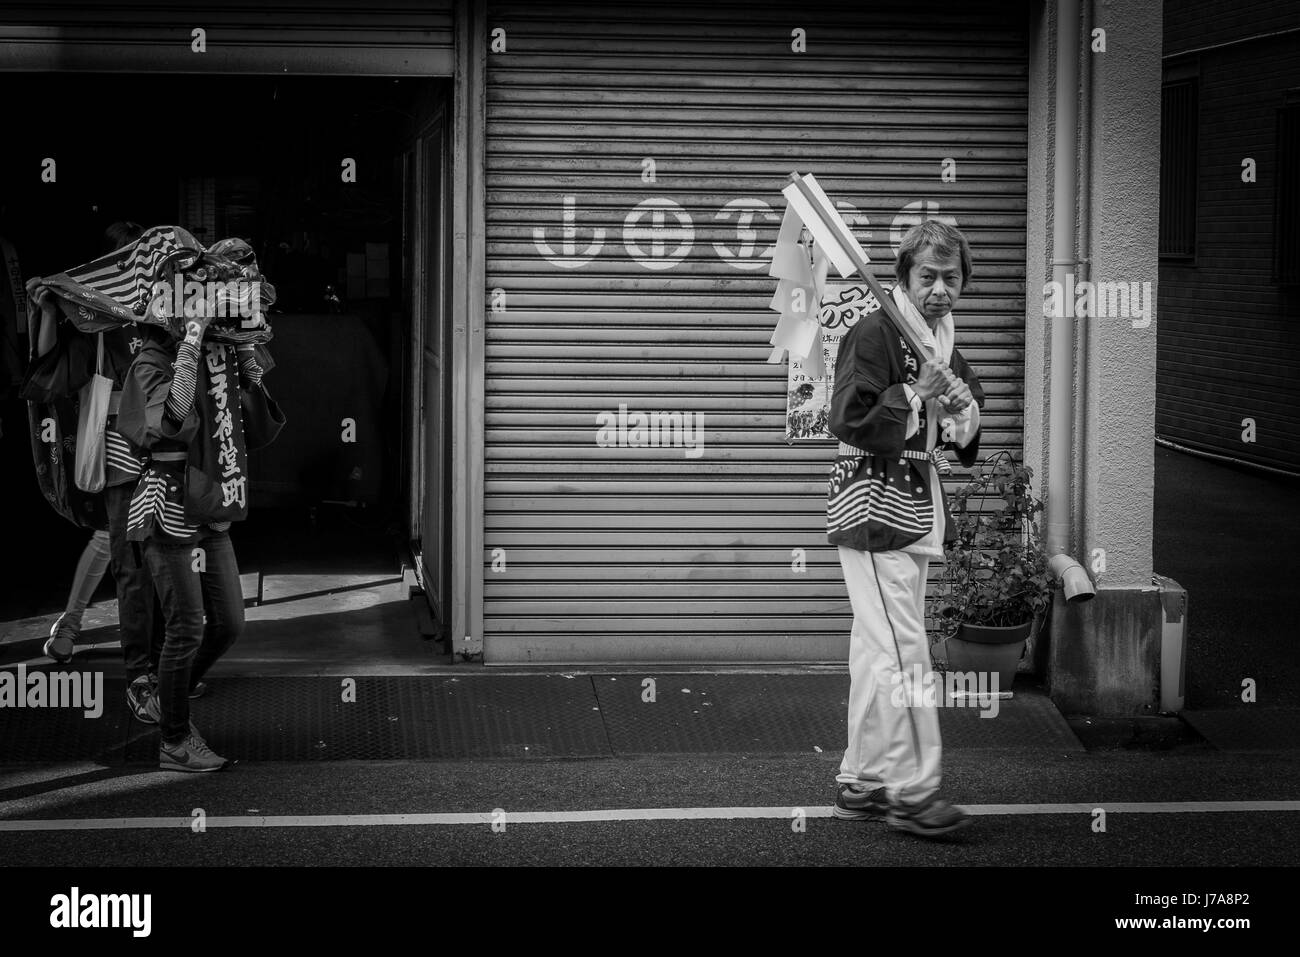 Two men walking down a street: the man in front is carrying a paper flag and is followed by another one wearing a dragon head mask.  Black and white. Stock Photo